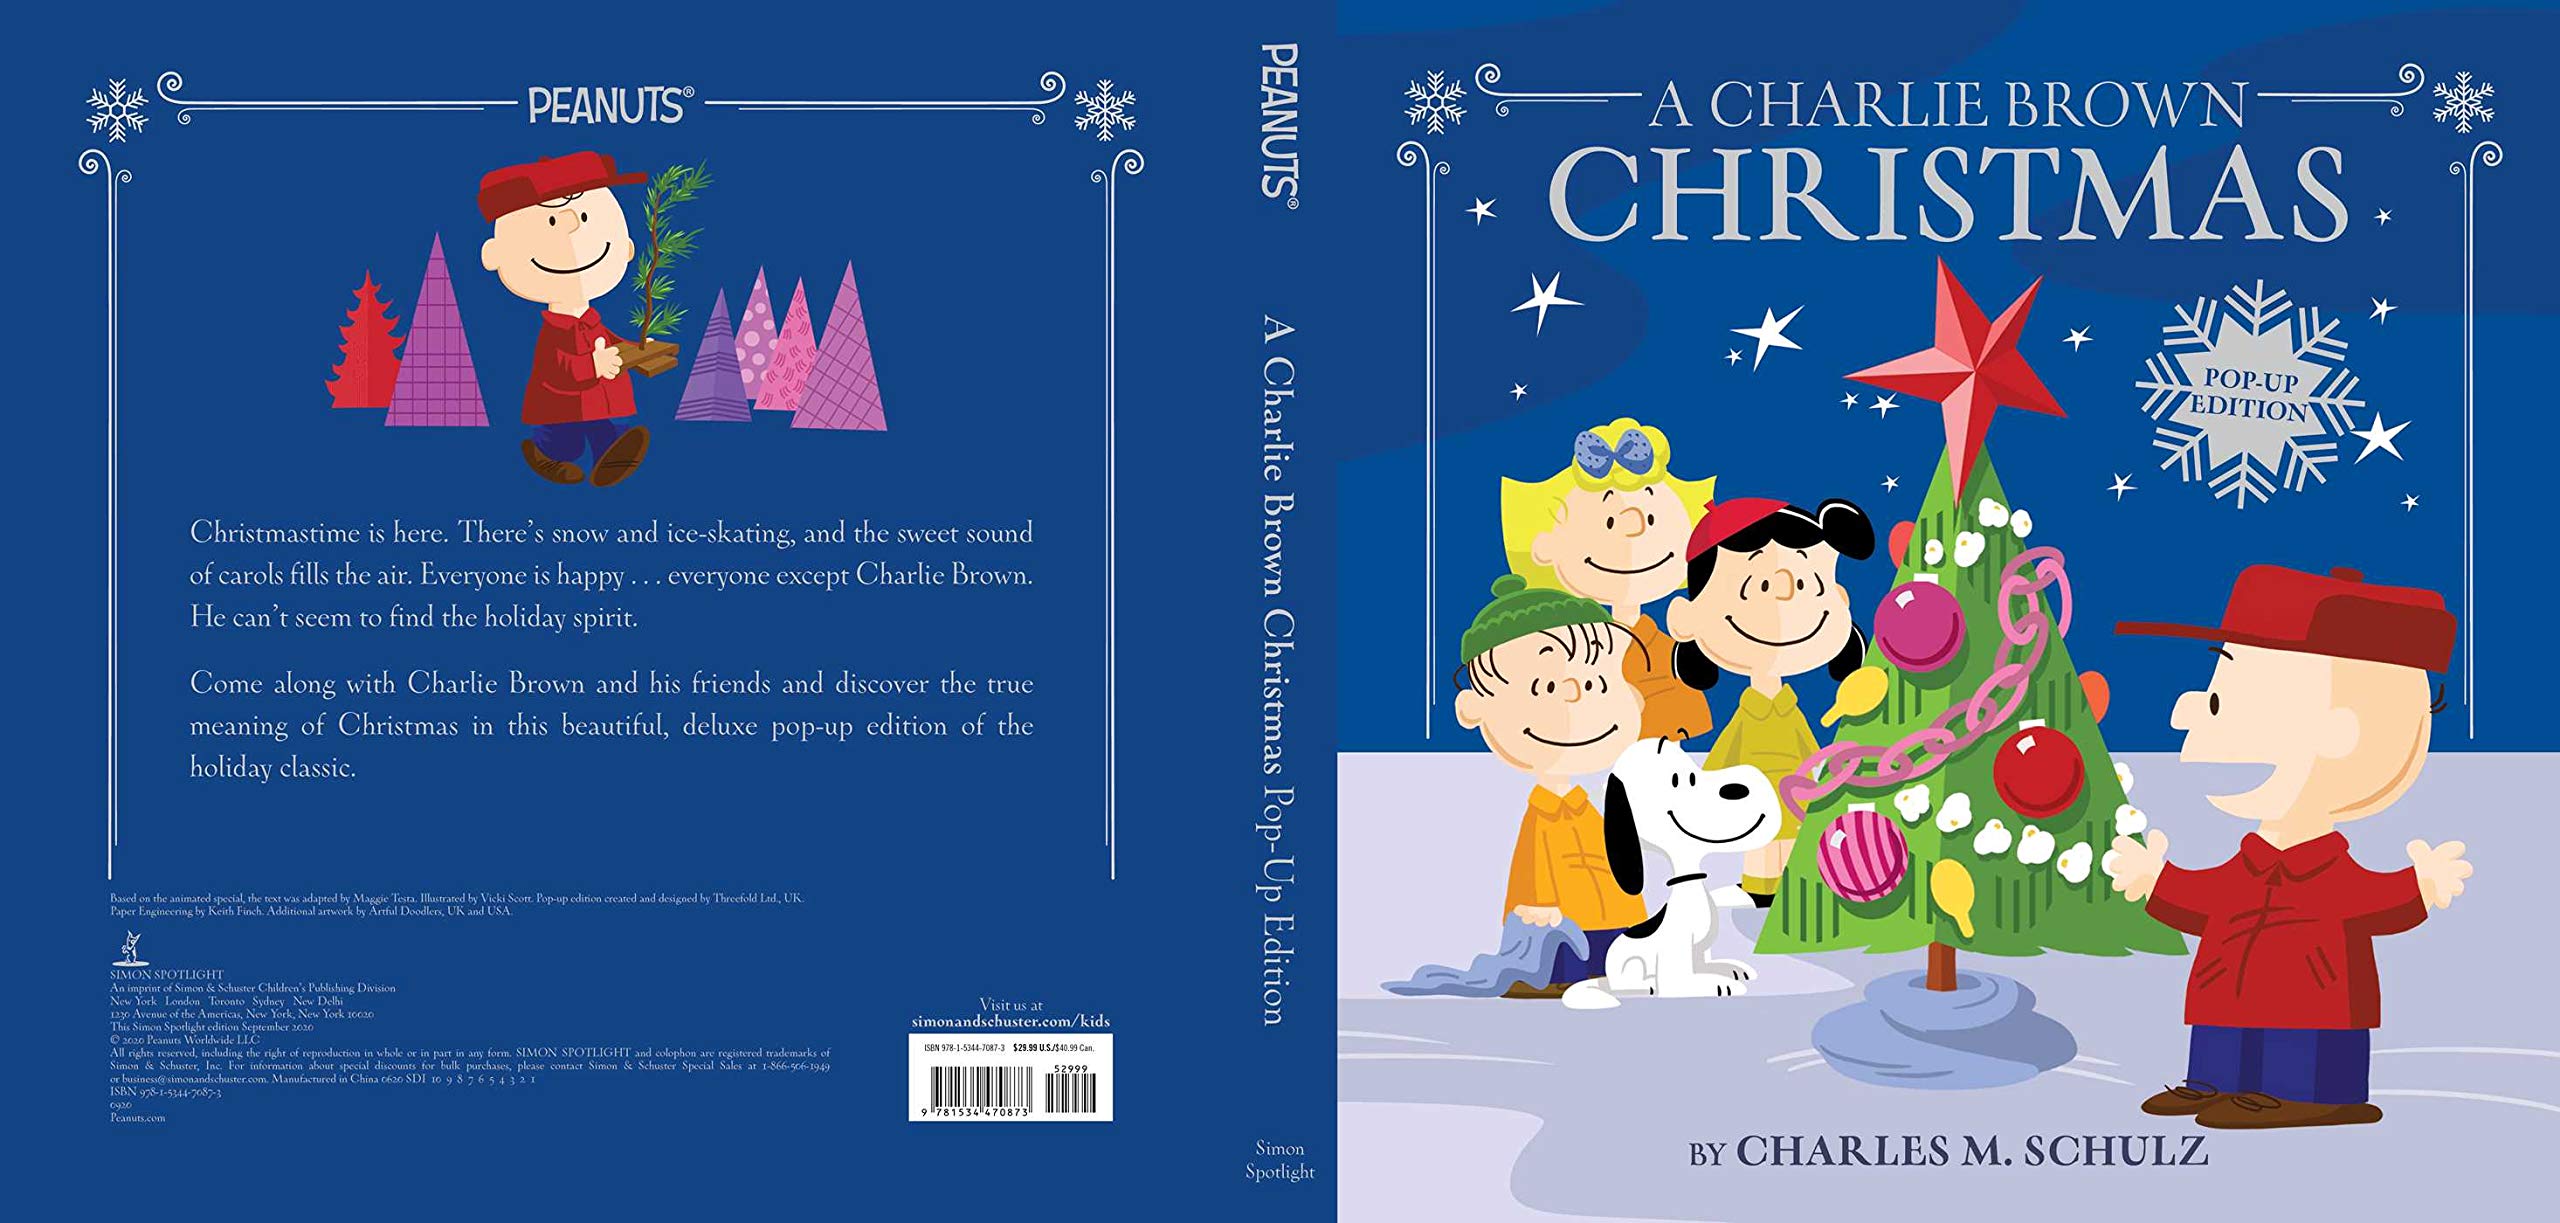 A Charlie Brown Christmas: Pop-Up Edition (Peanuts)